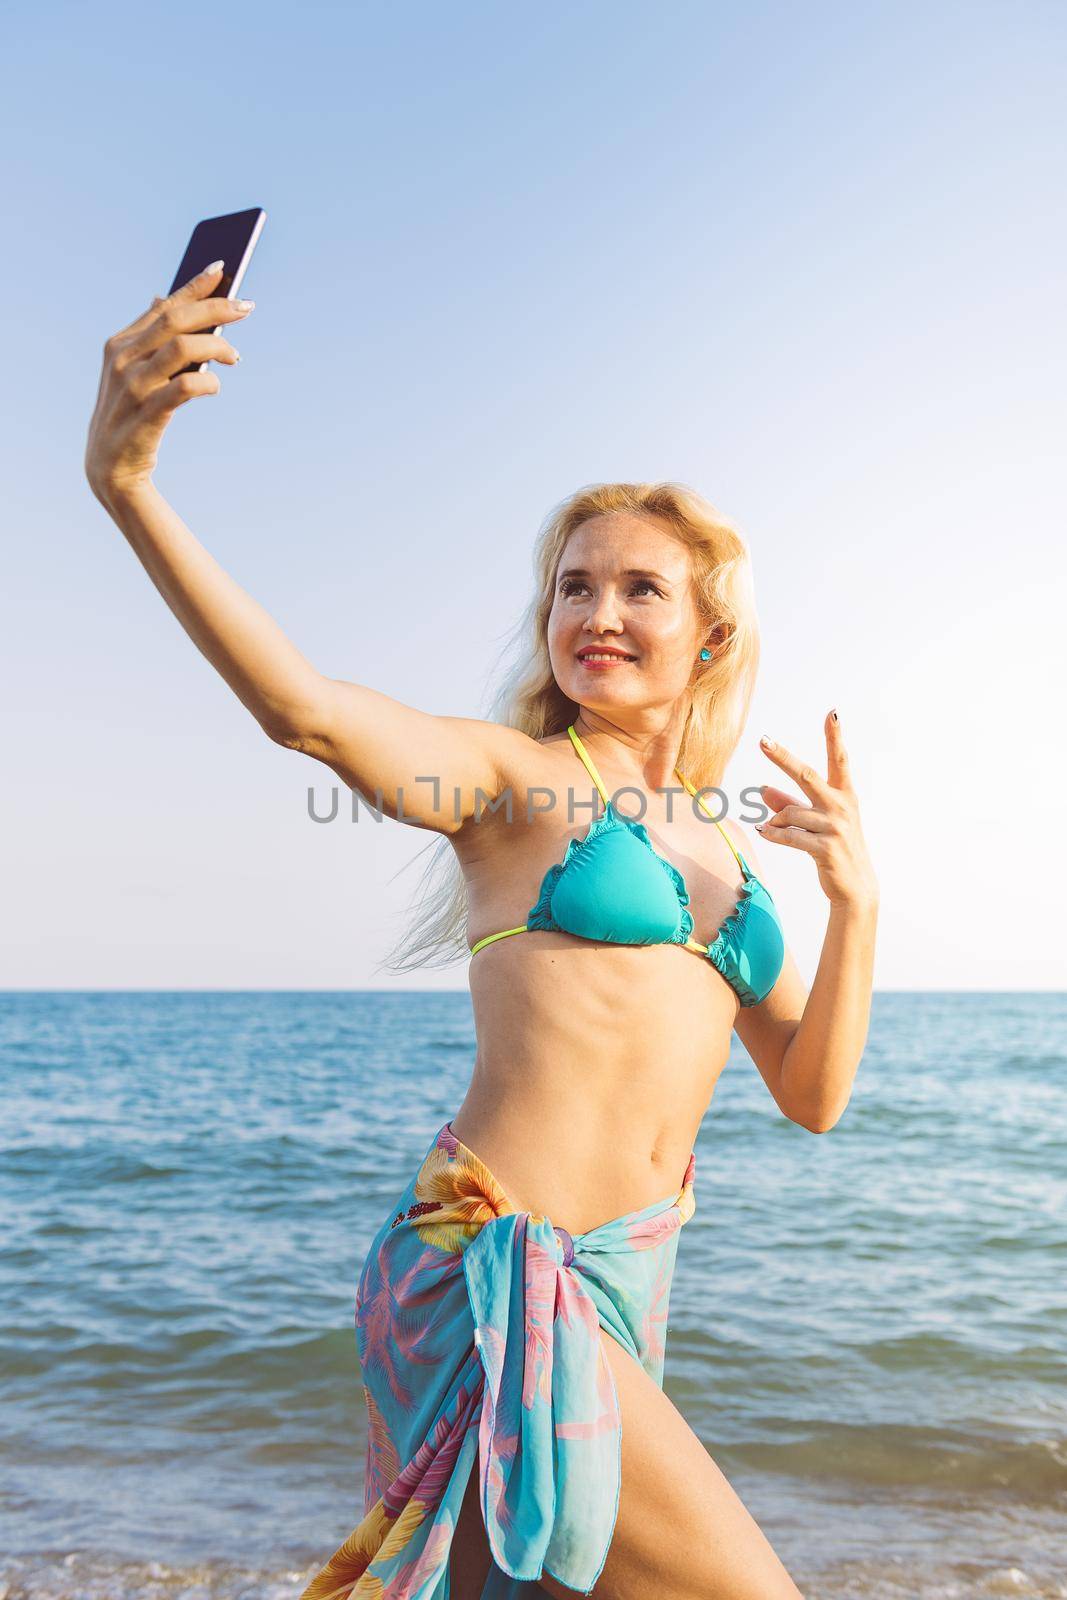 vertical photo of a blonde woman taking a selfie photo with her mobile phone at beach at sunset on her summer vacation, communication and technology concept